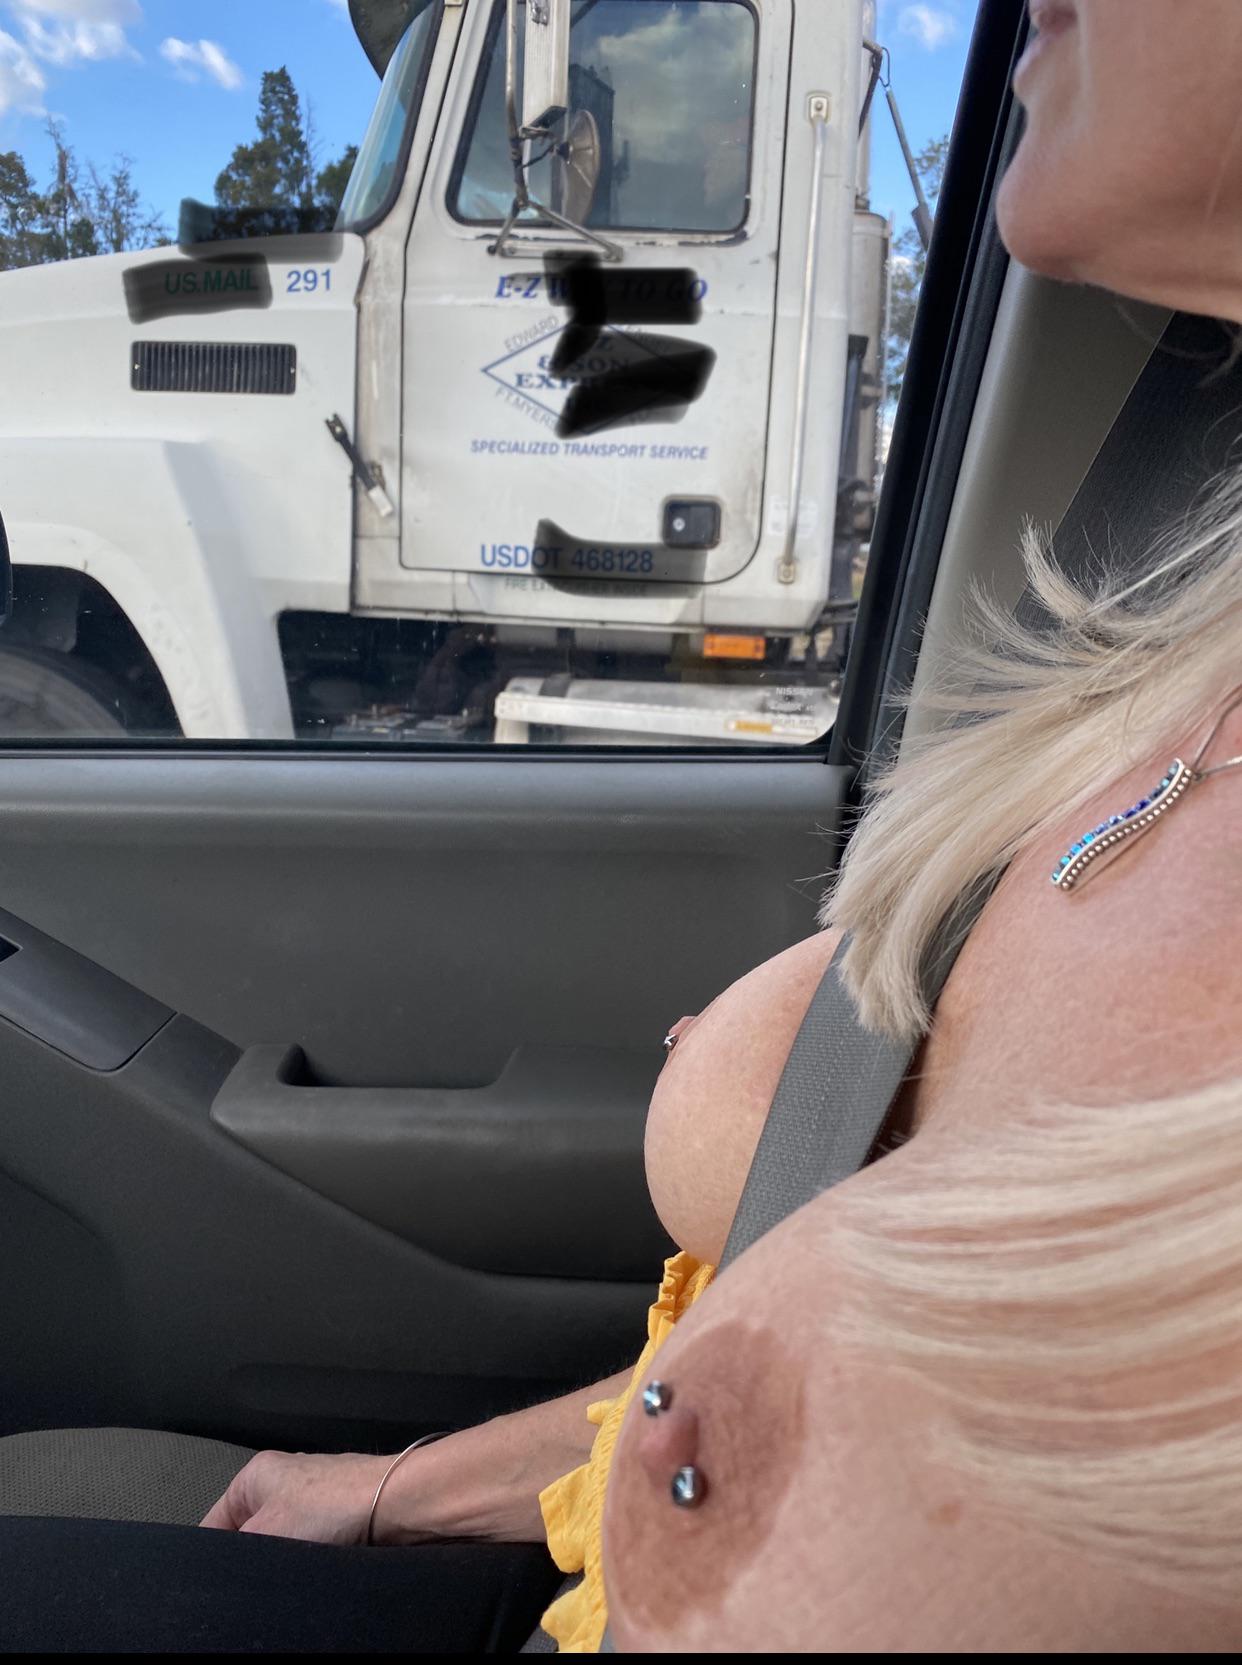 deanne peacock reccomend flashing pussy to truckers pic